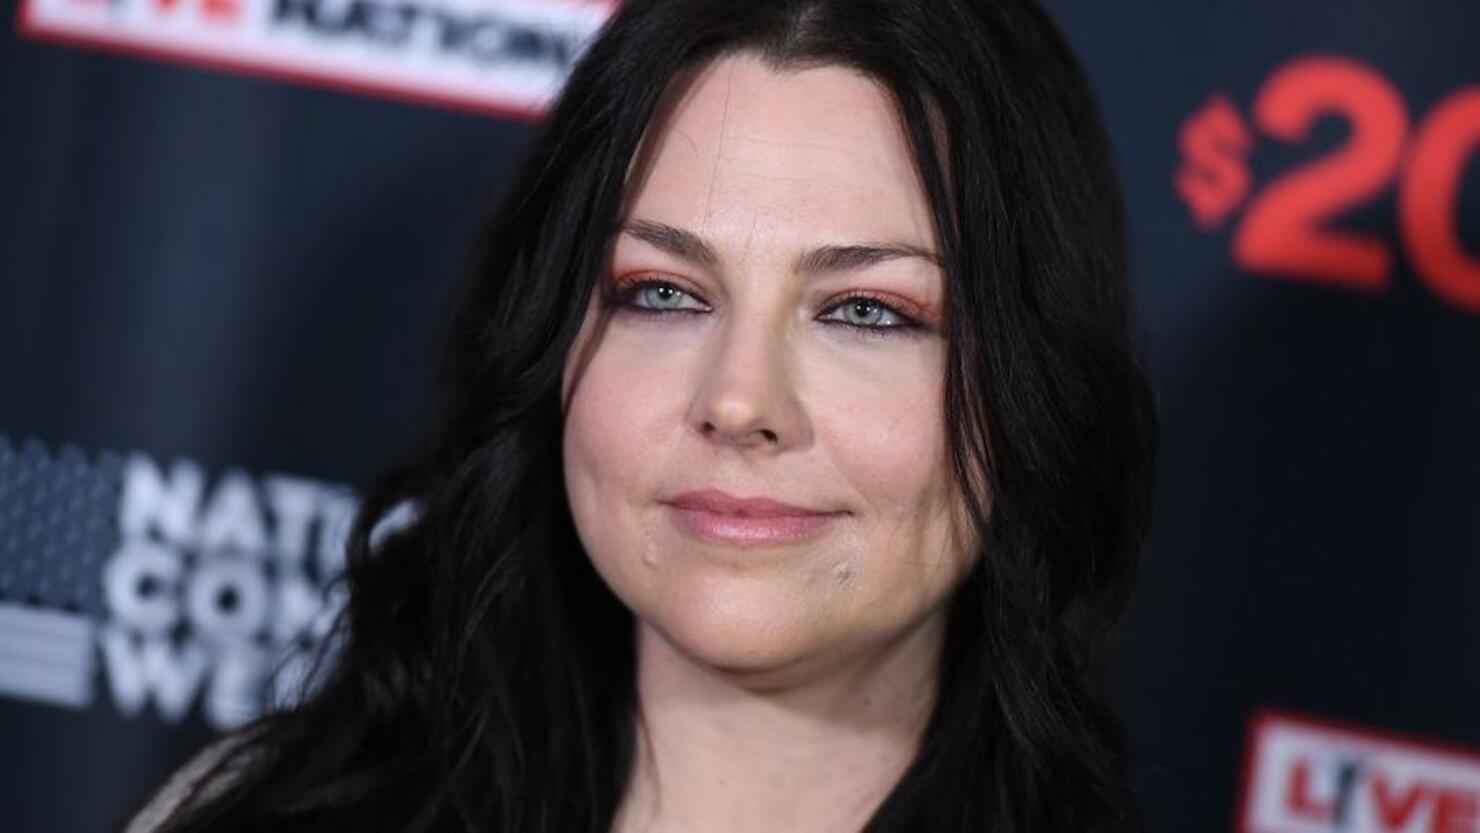 Evanescence's Amy Lee Opens Up About Female Relationships In The Rock